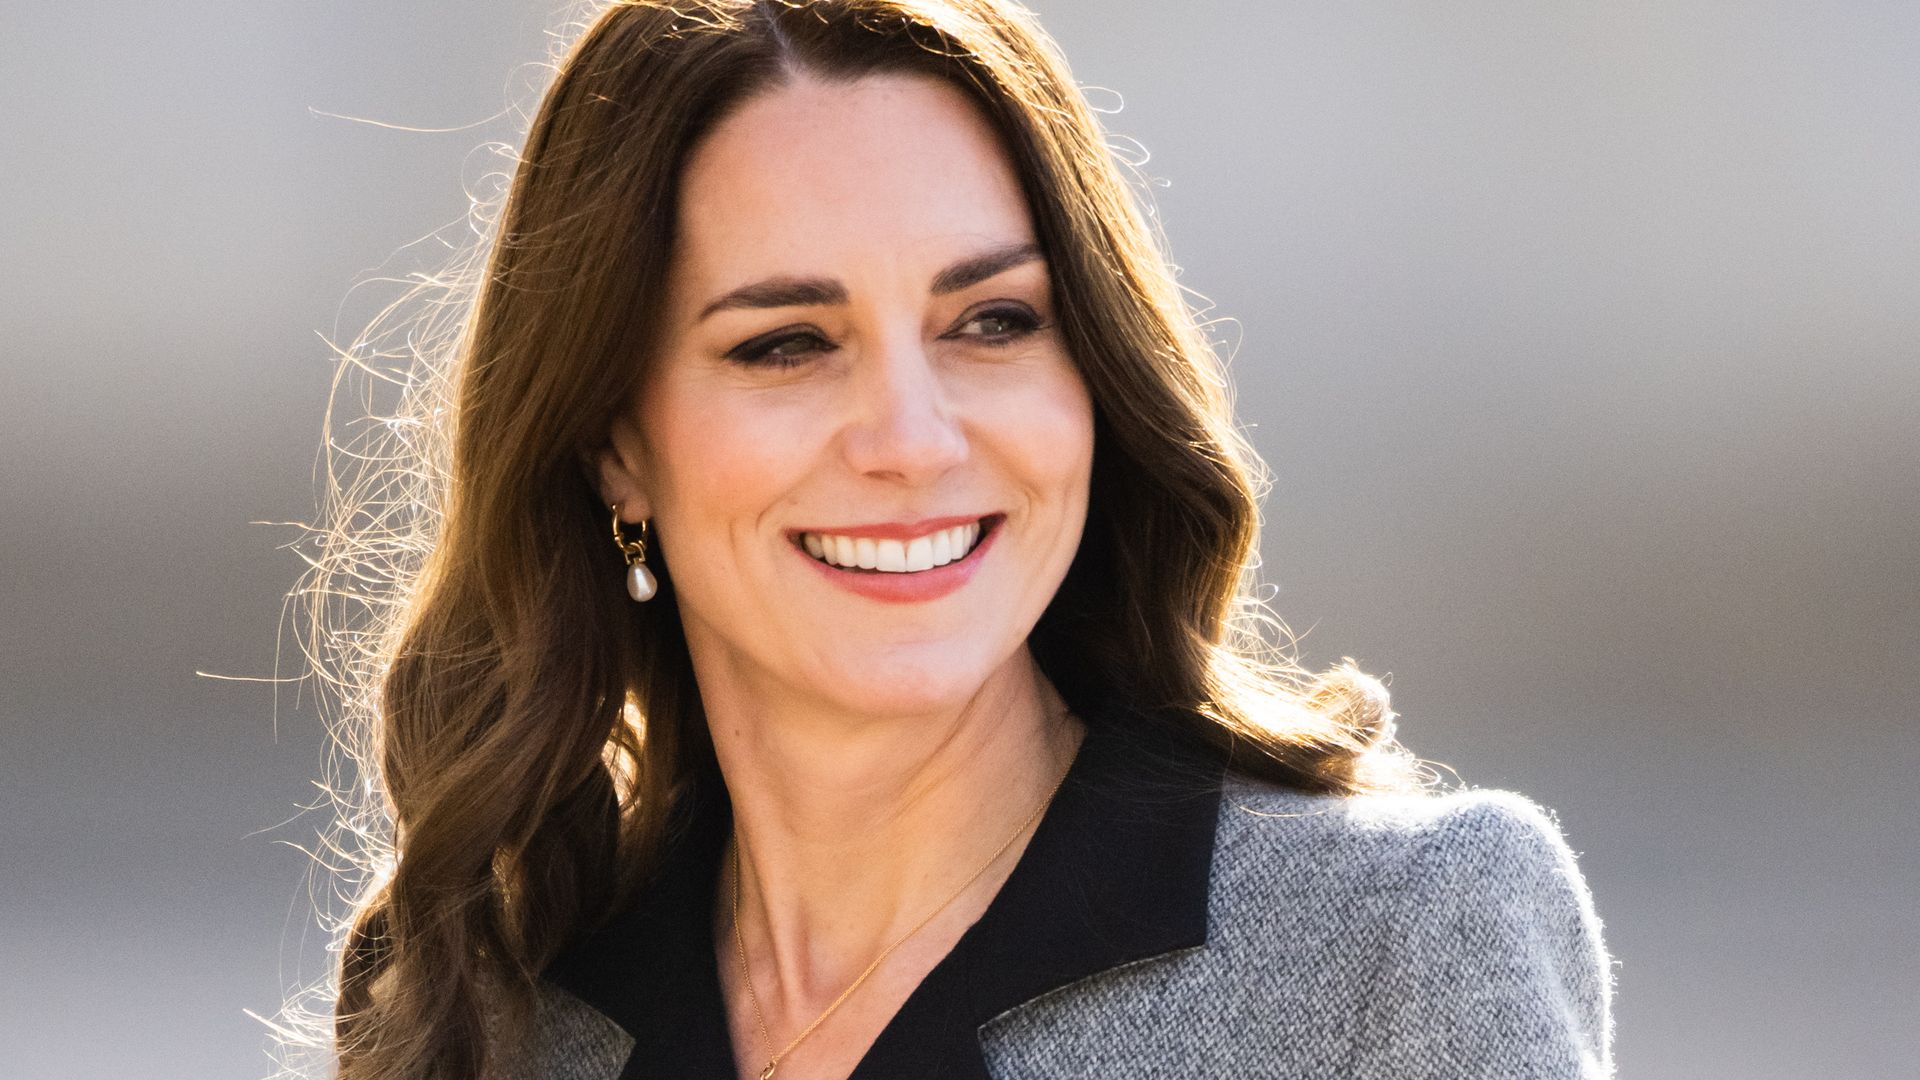 Catherine, Princess of Wales walks across the Amalienborg courtyard on February 23, 2022 in Copenhagen, Denmark. The Duchess of Cambridge visits Copenhagen between 22nd and 23rd February on a working visit with The Royal Foundation Centre for Early Childh